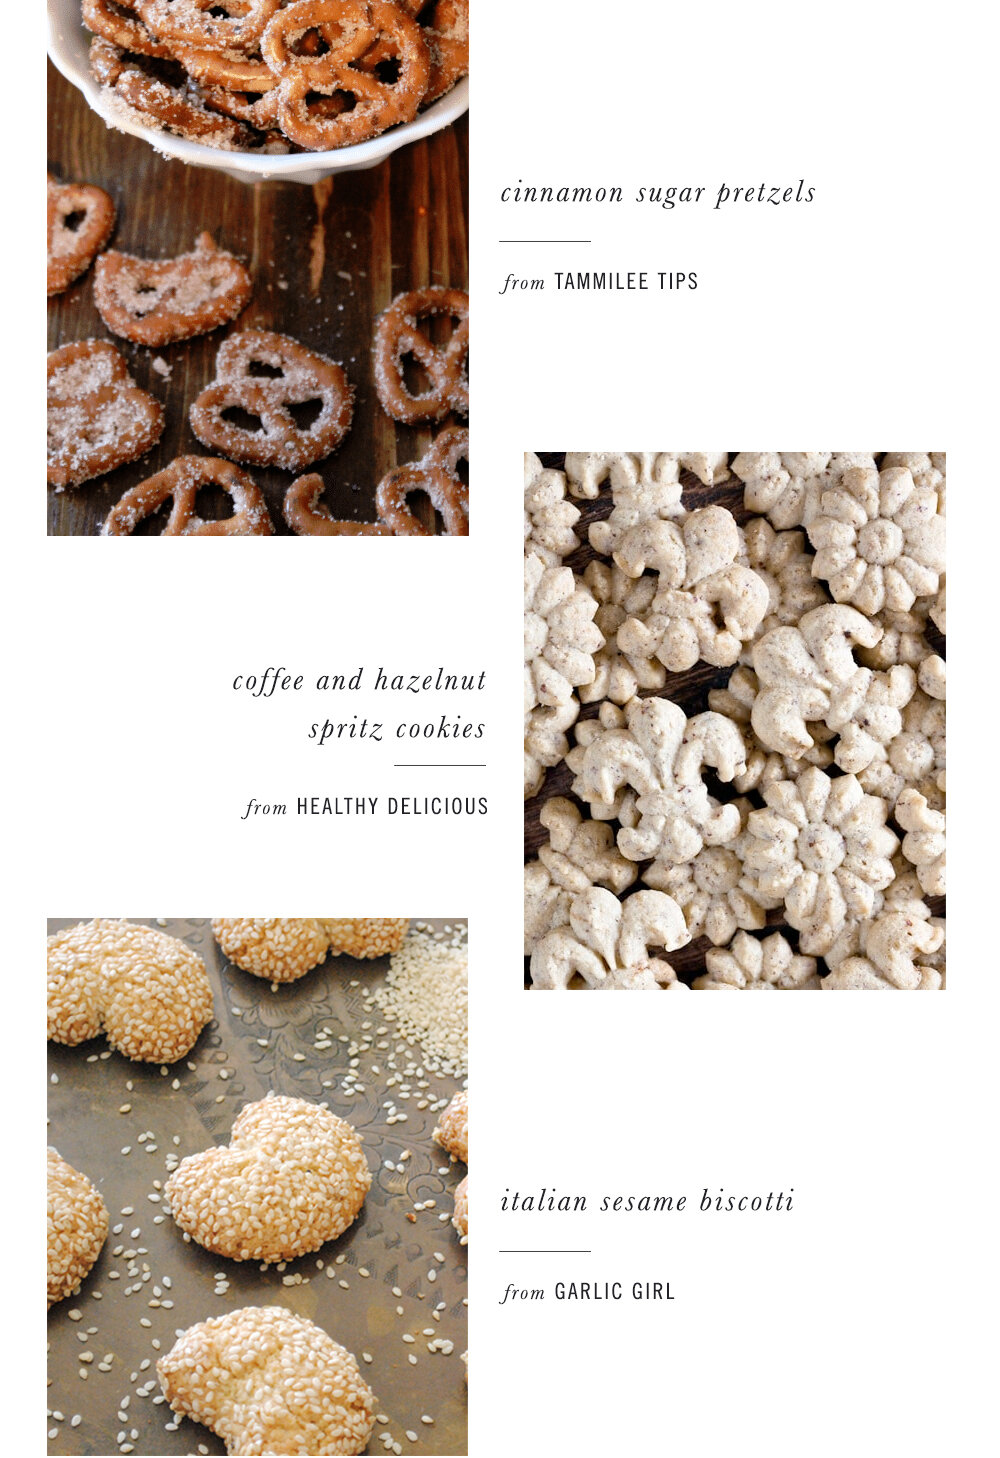 merry & sweet - holiday cookie & treat recipe roundup